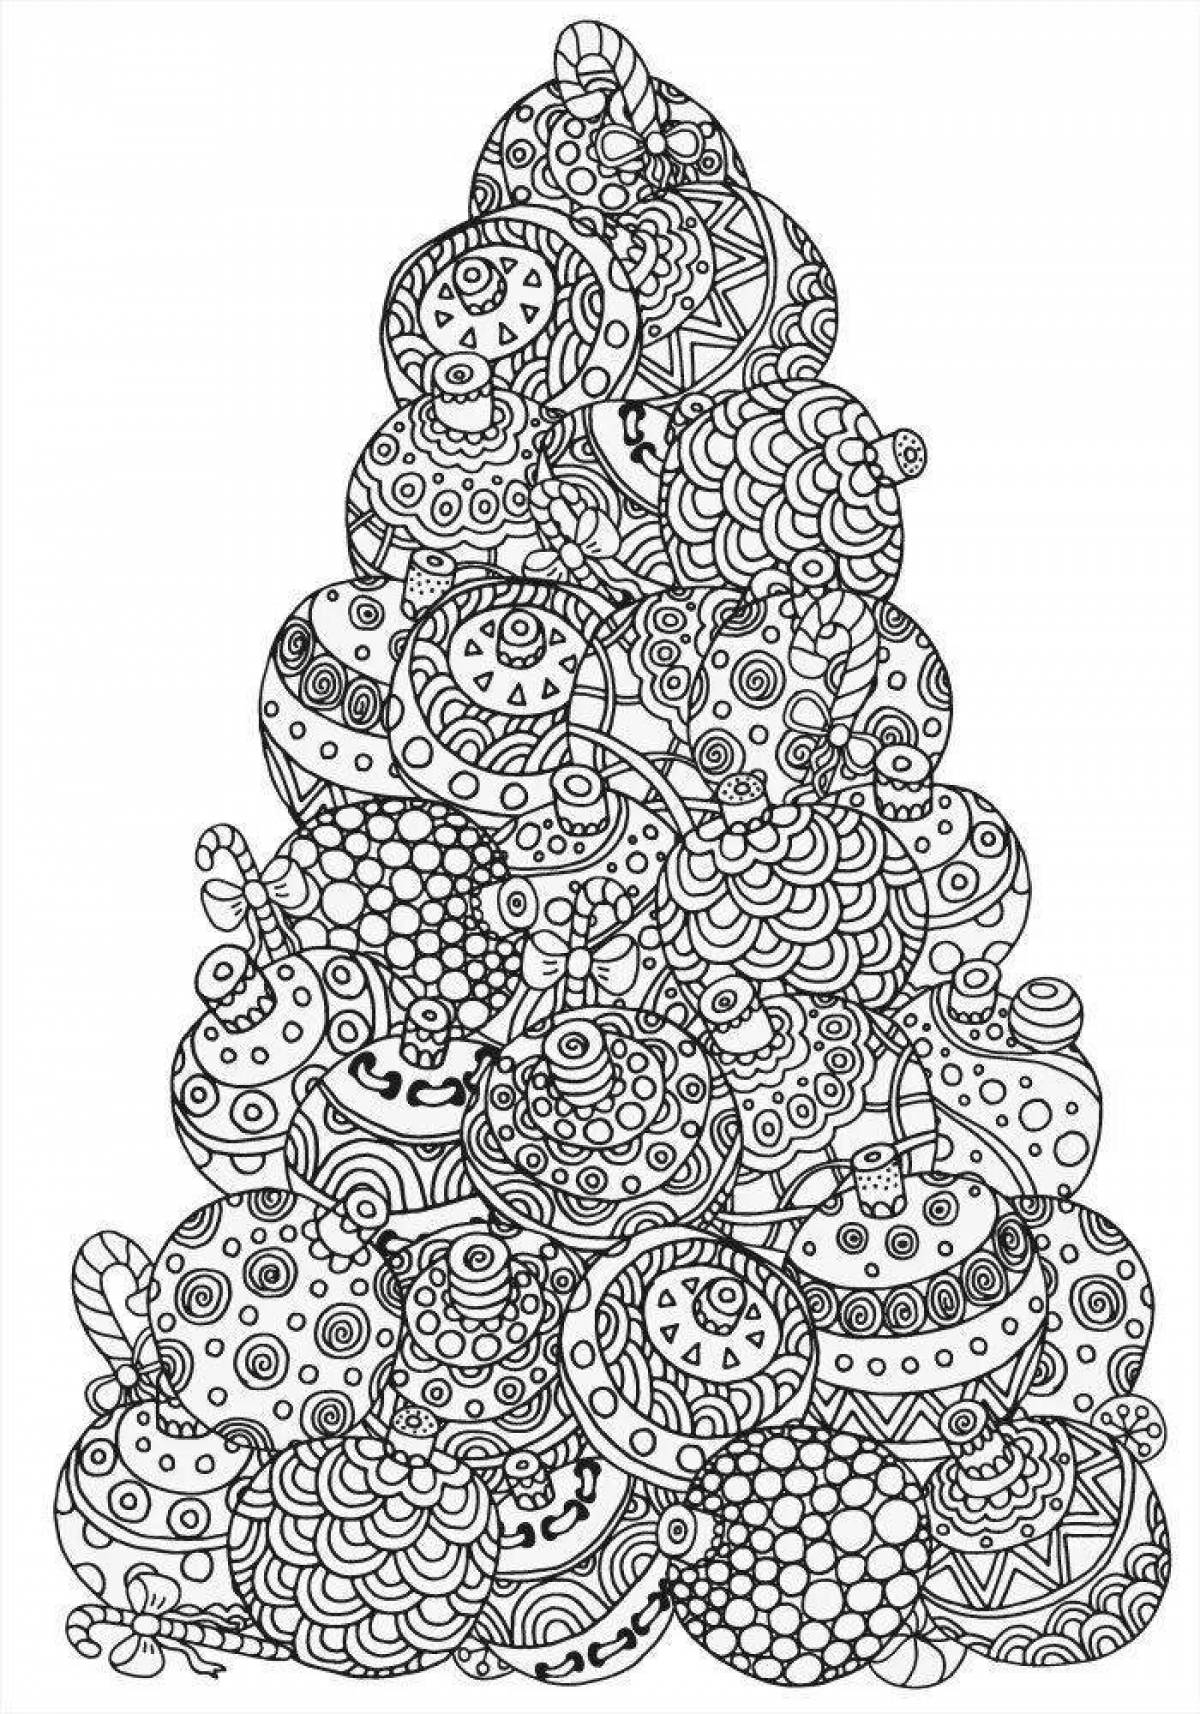 Adorable Christmas coloring book for adults